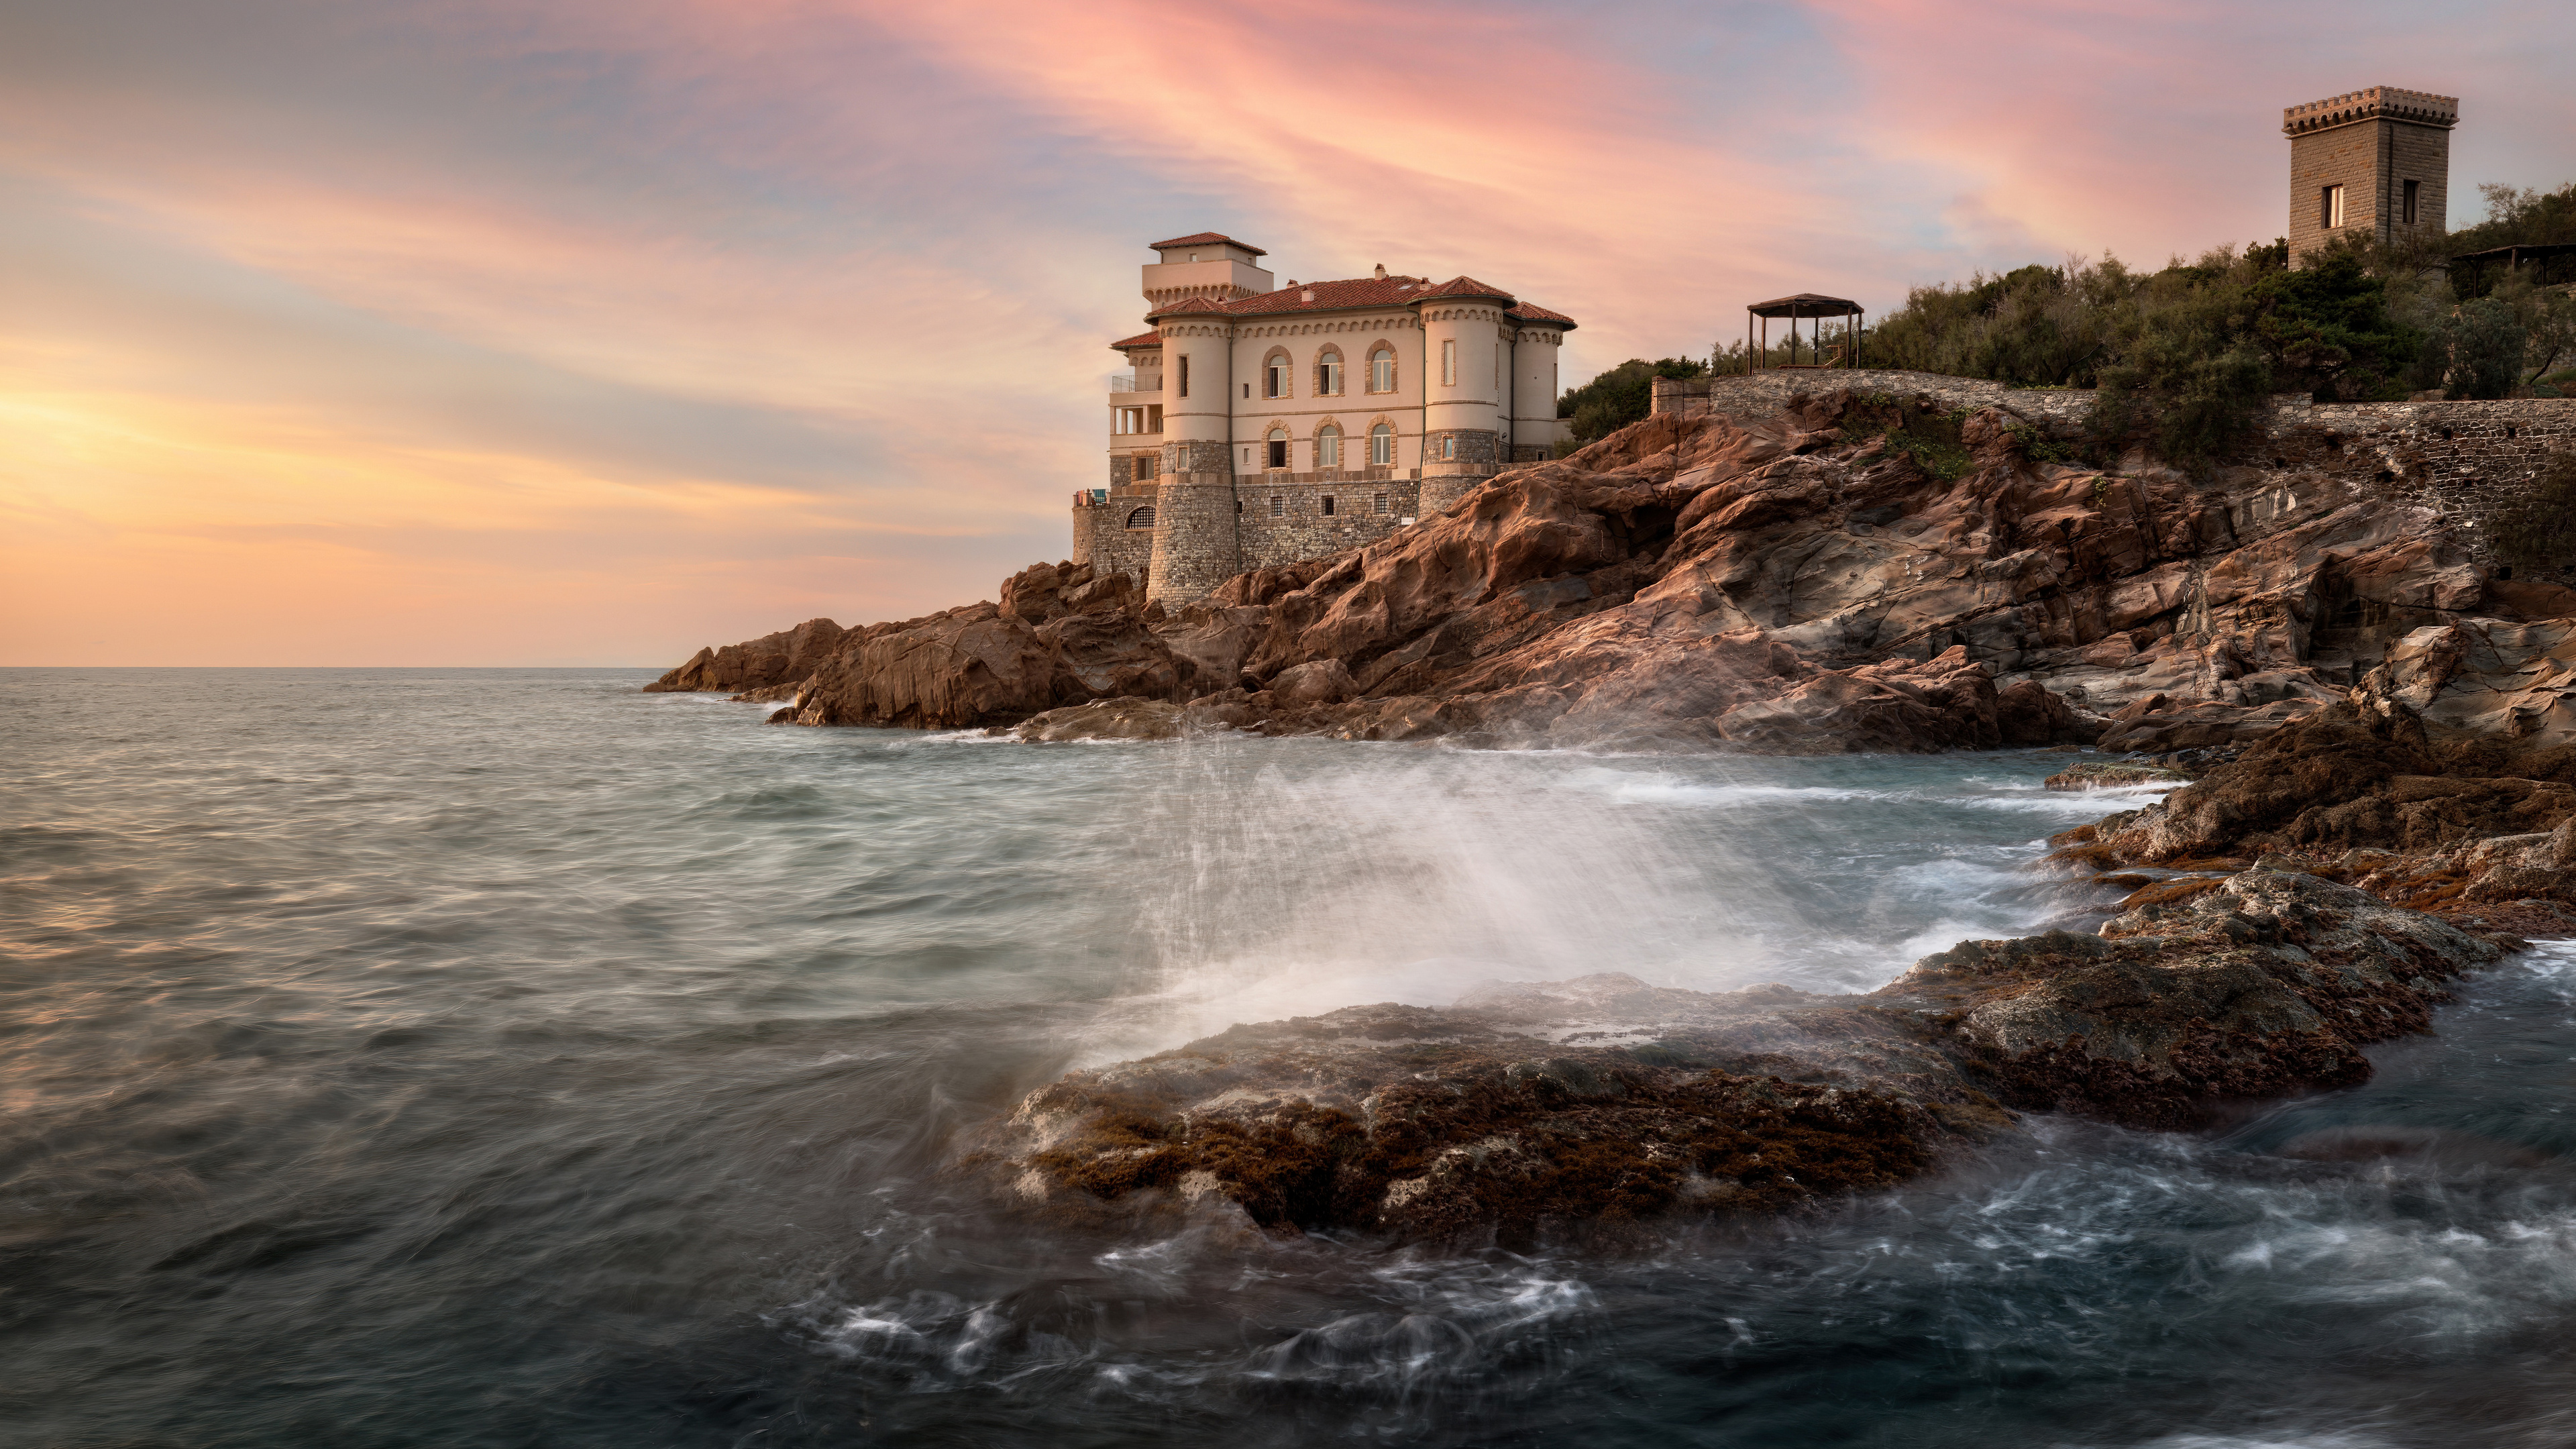 Free photo Boccale Castle on the shore of the raging sea